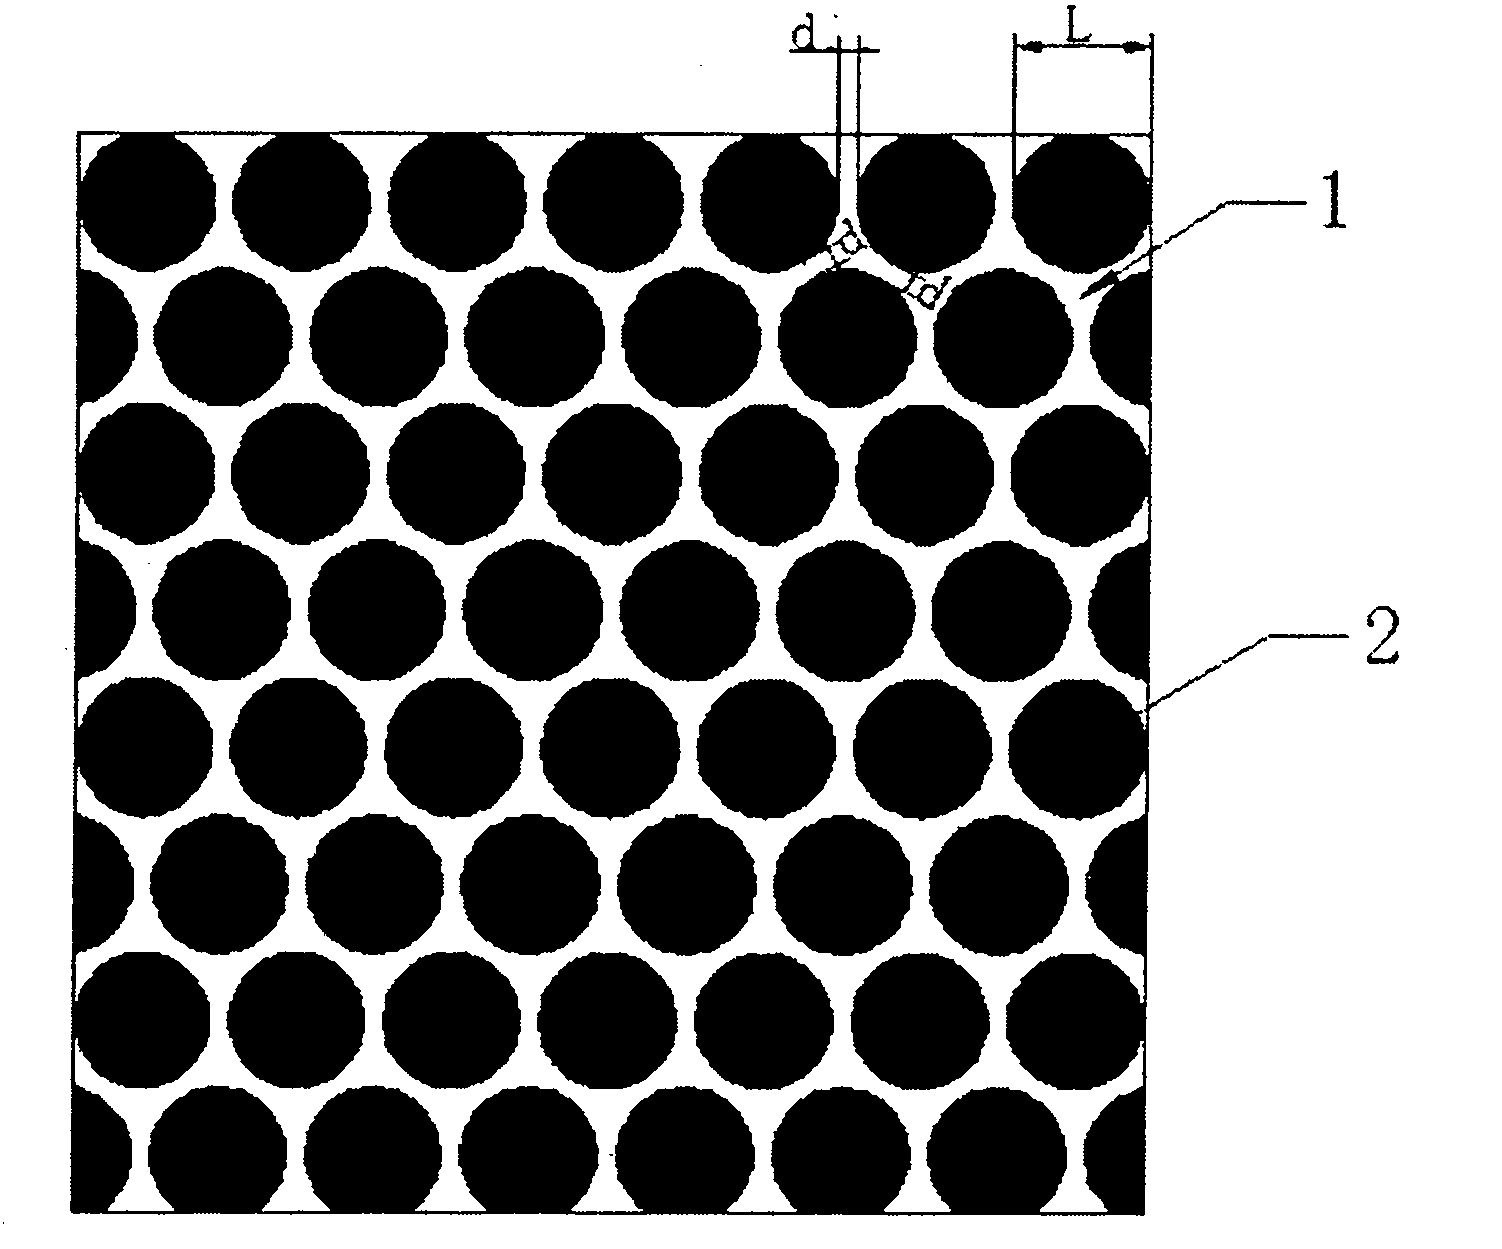 Stereoscopic grating material